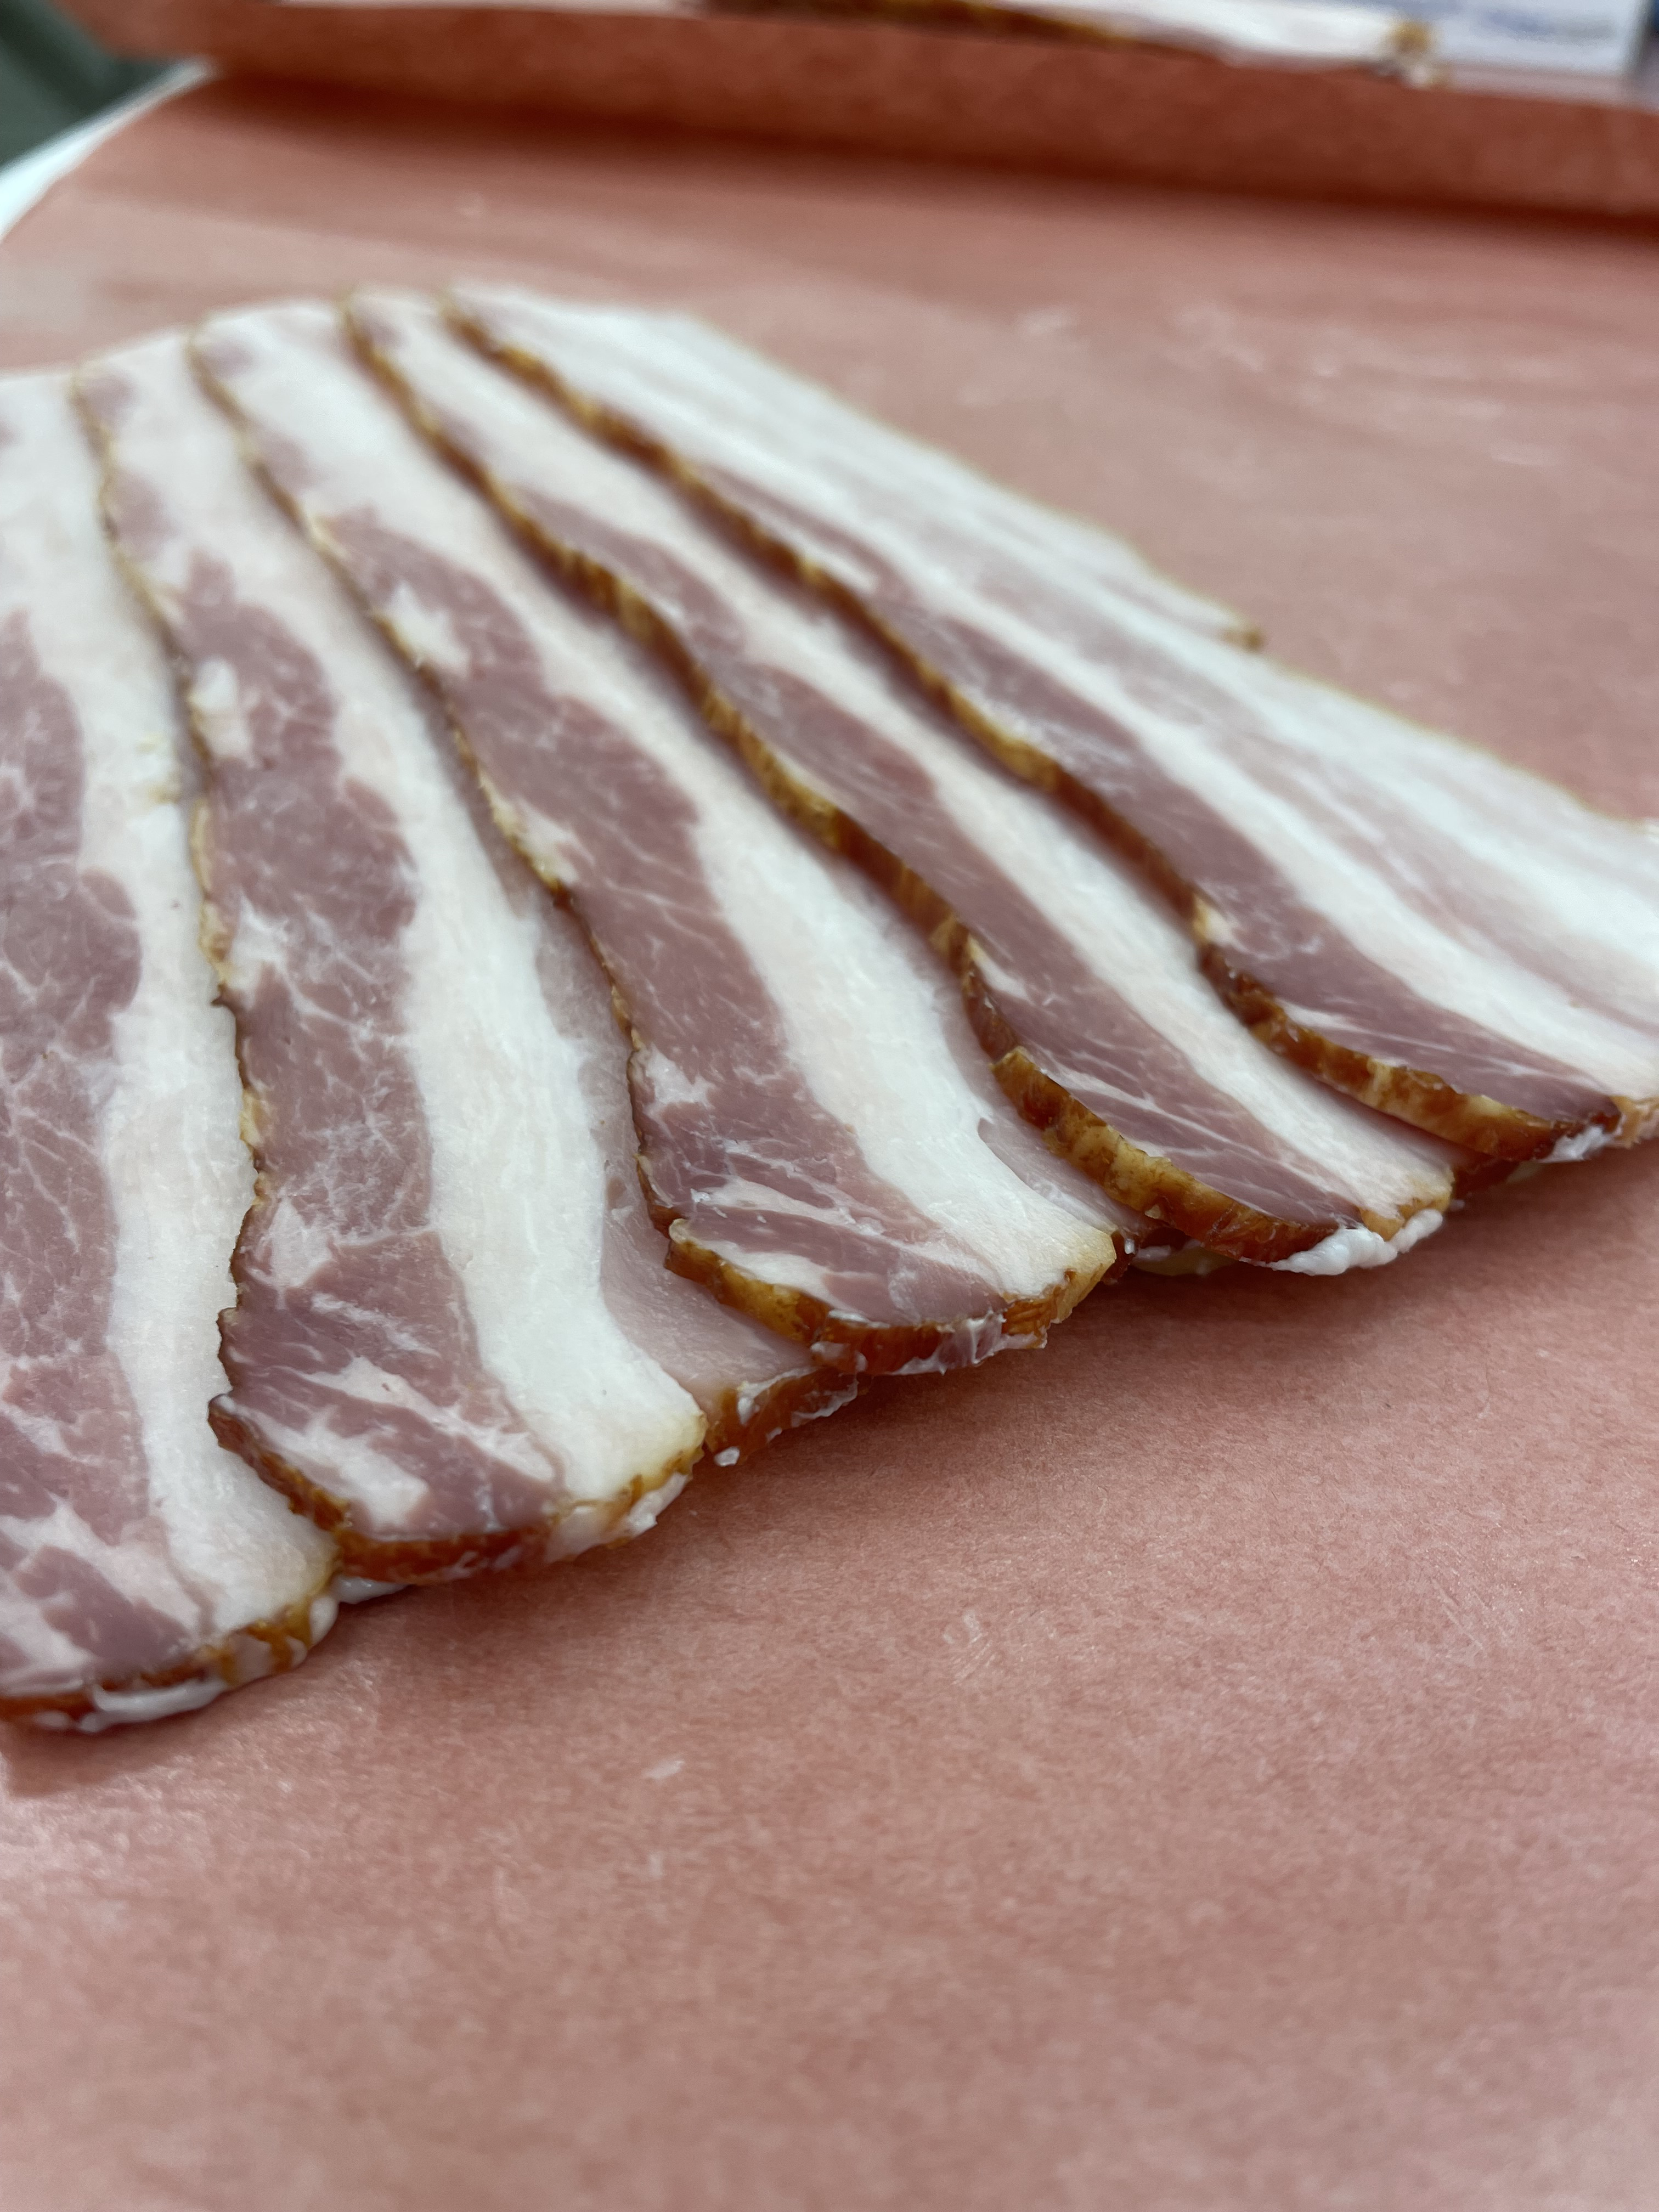 Several slabs of bacon cut up and placed in packaging